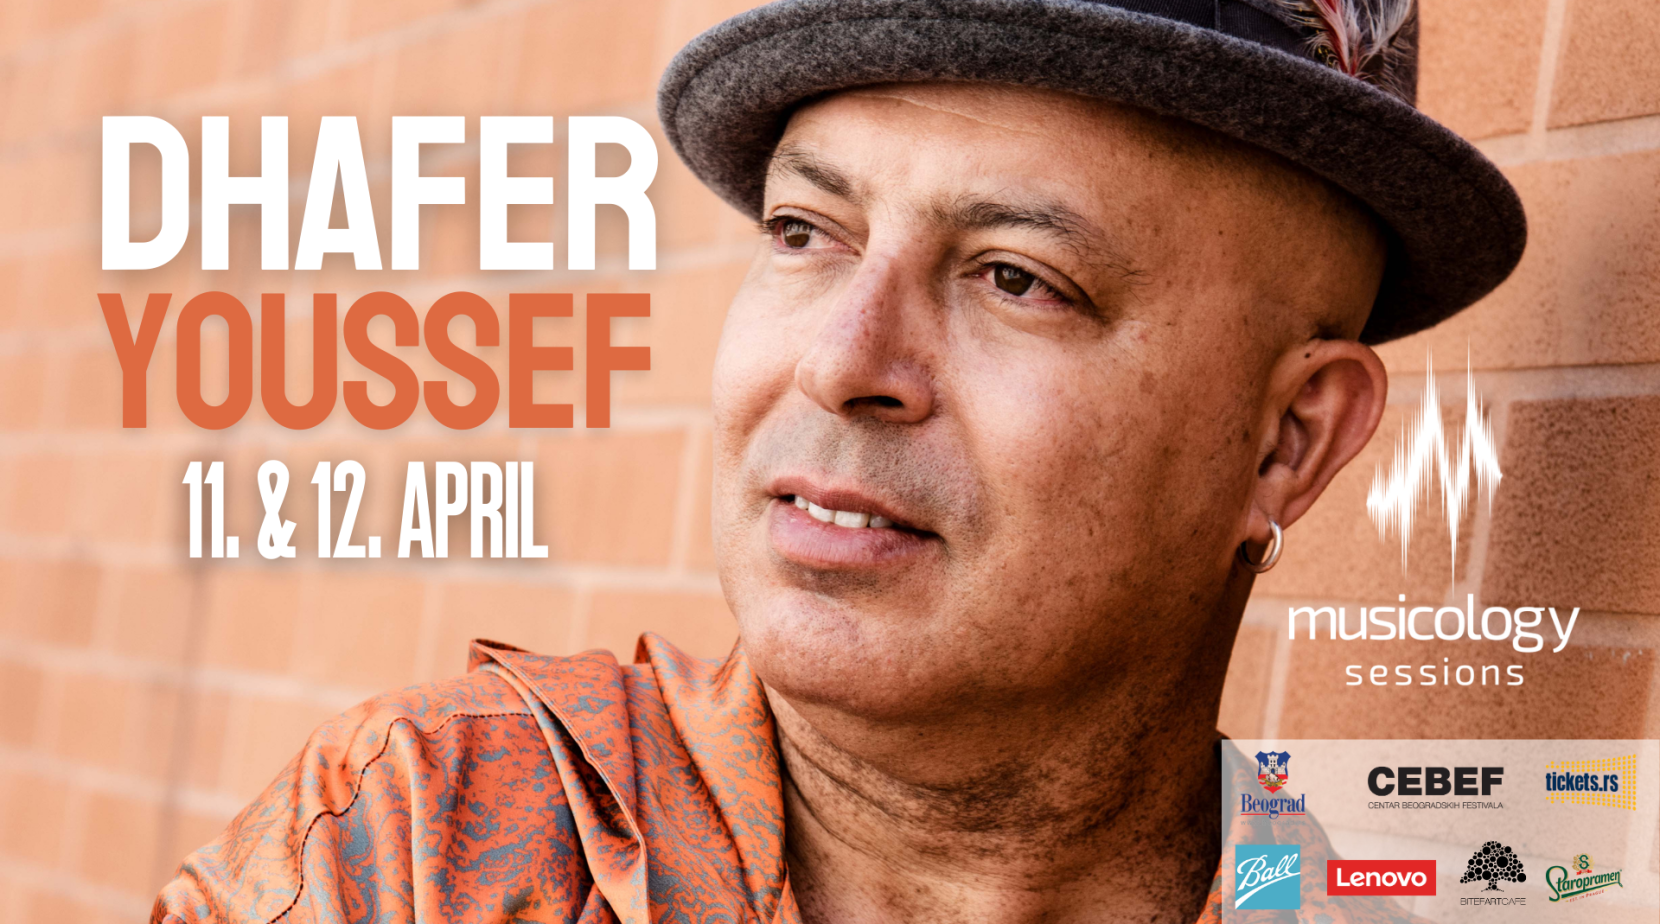 dhafer youssef (1920 x 1080 px)